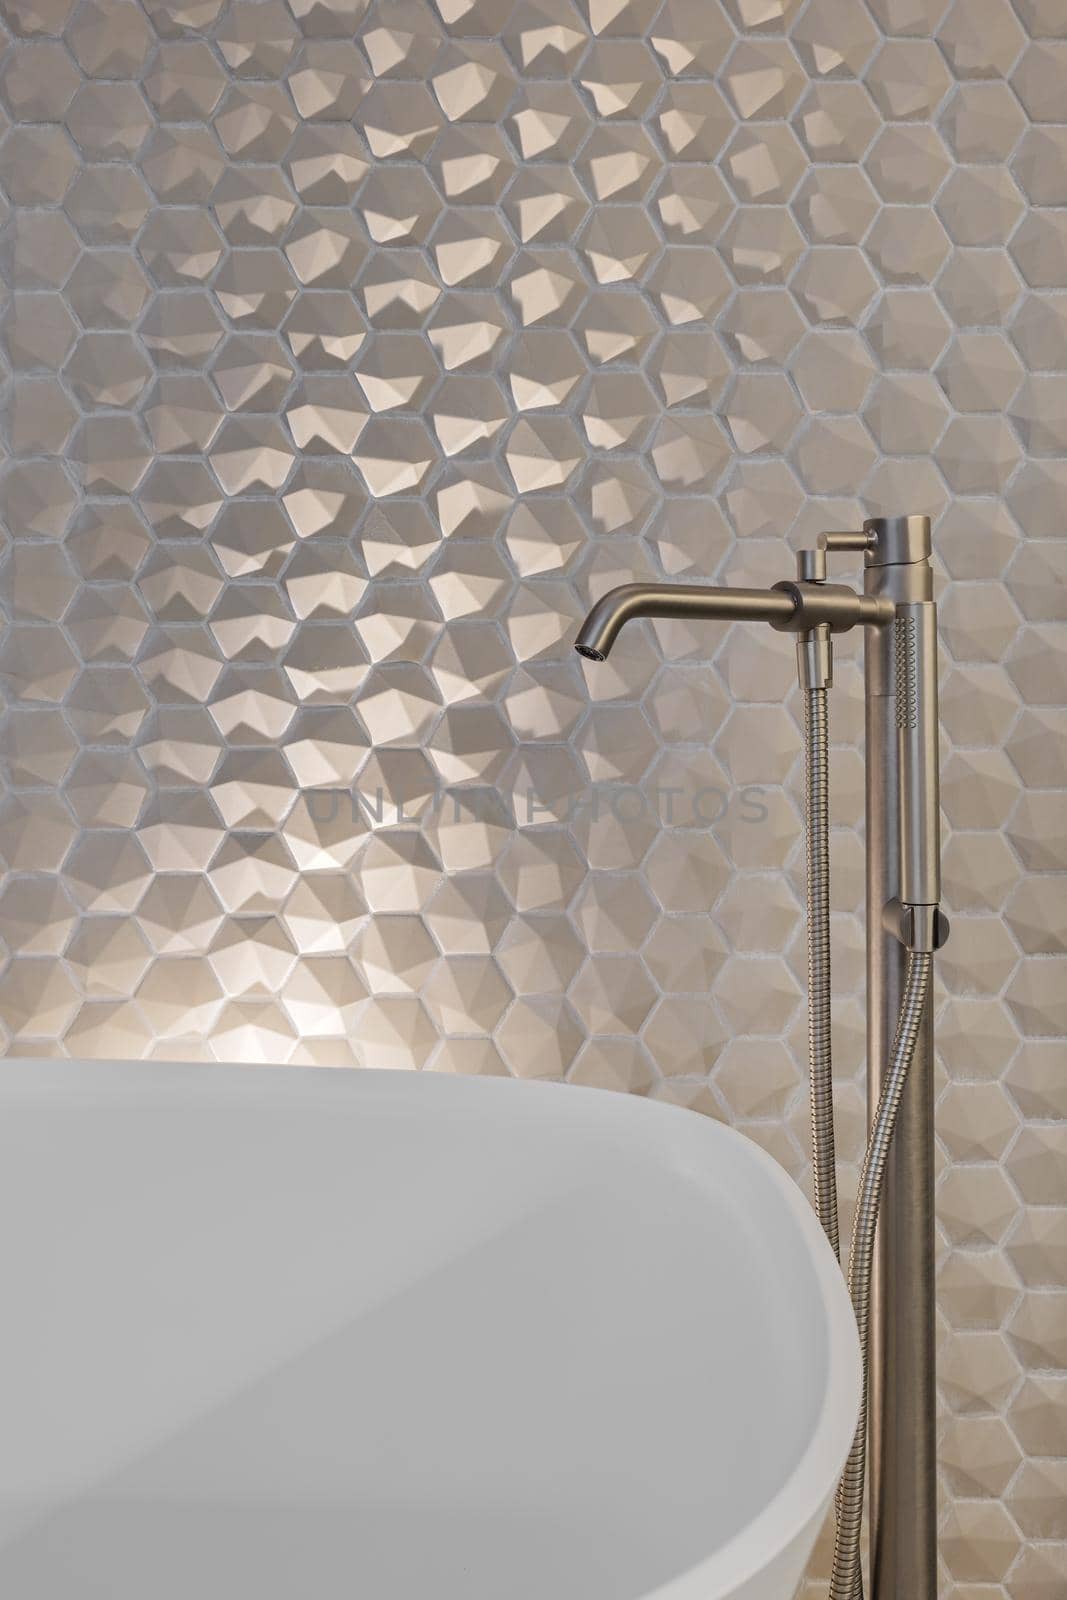 Metal faucet and shower in bathroom with hexagon tiles and white bath tub.